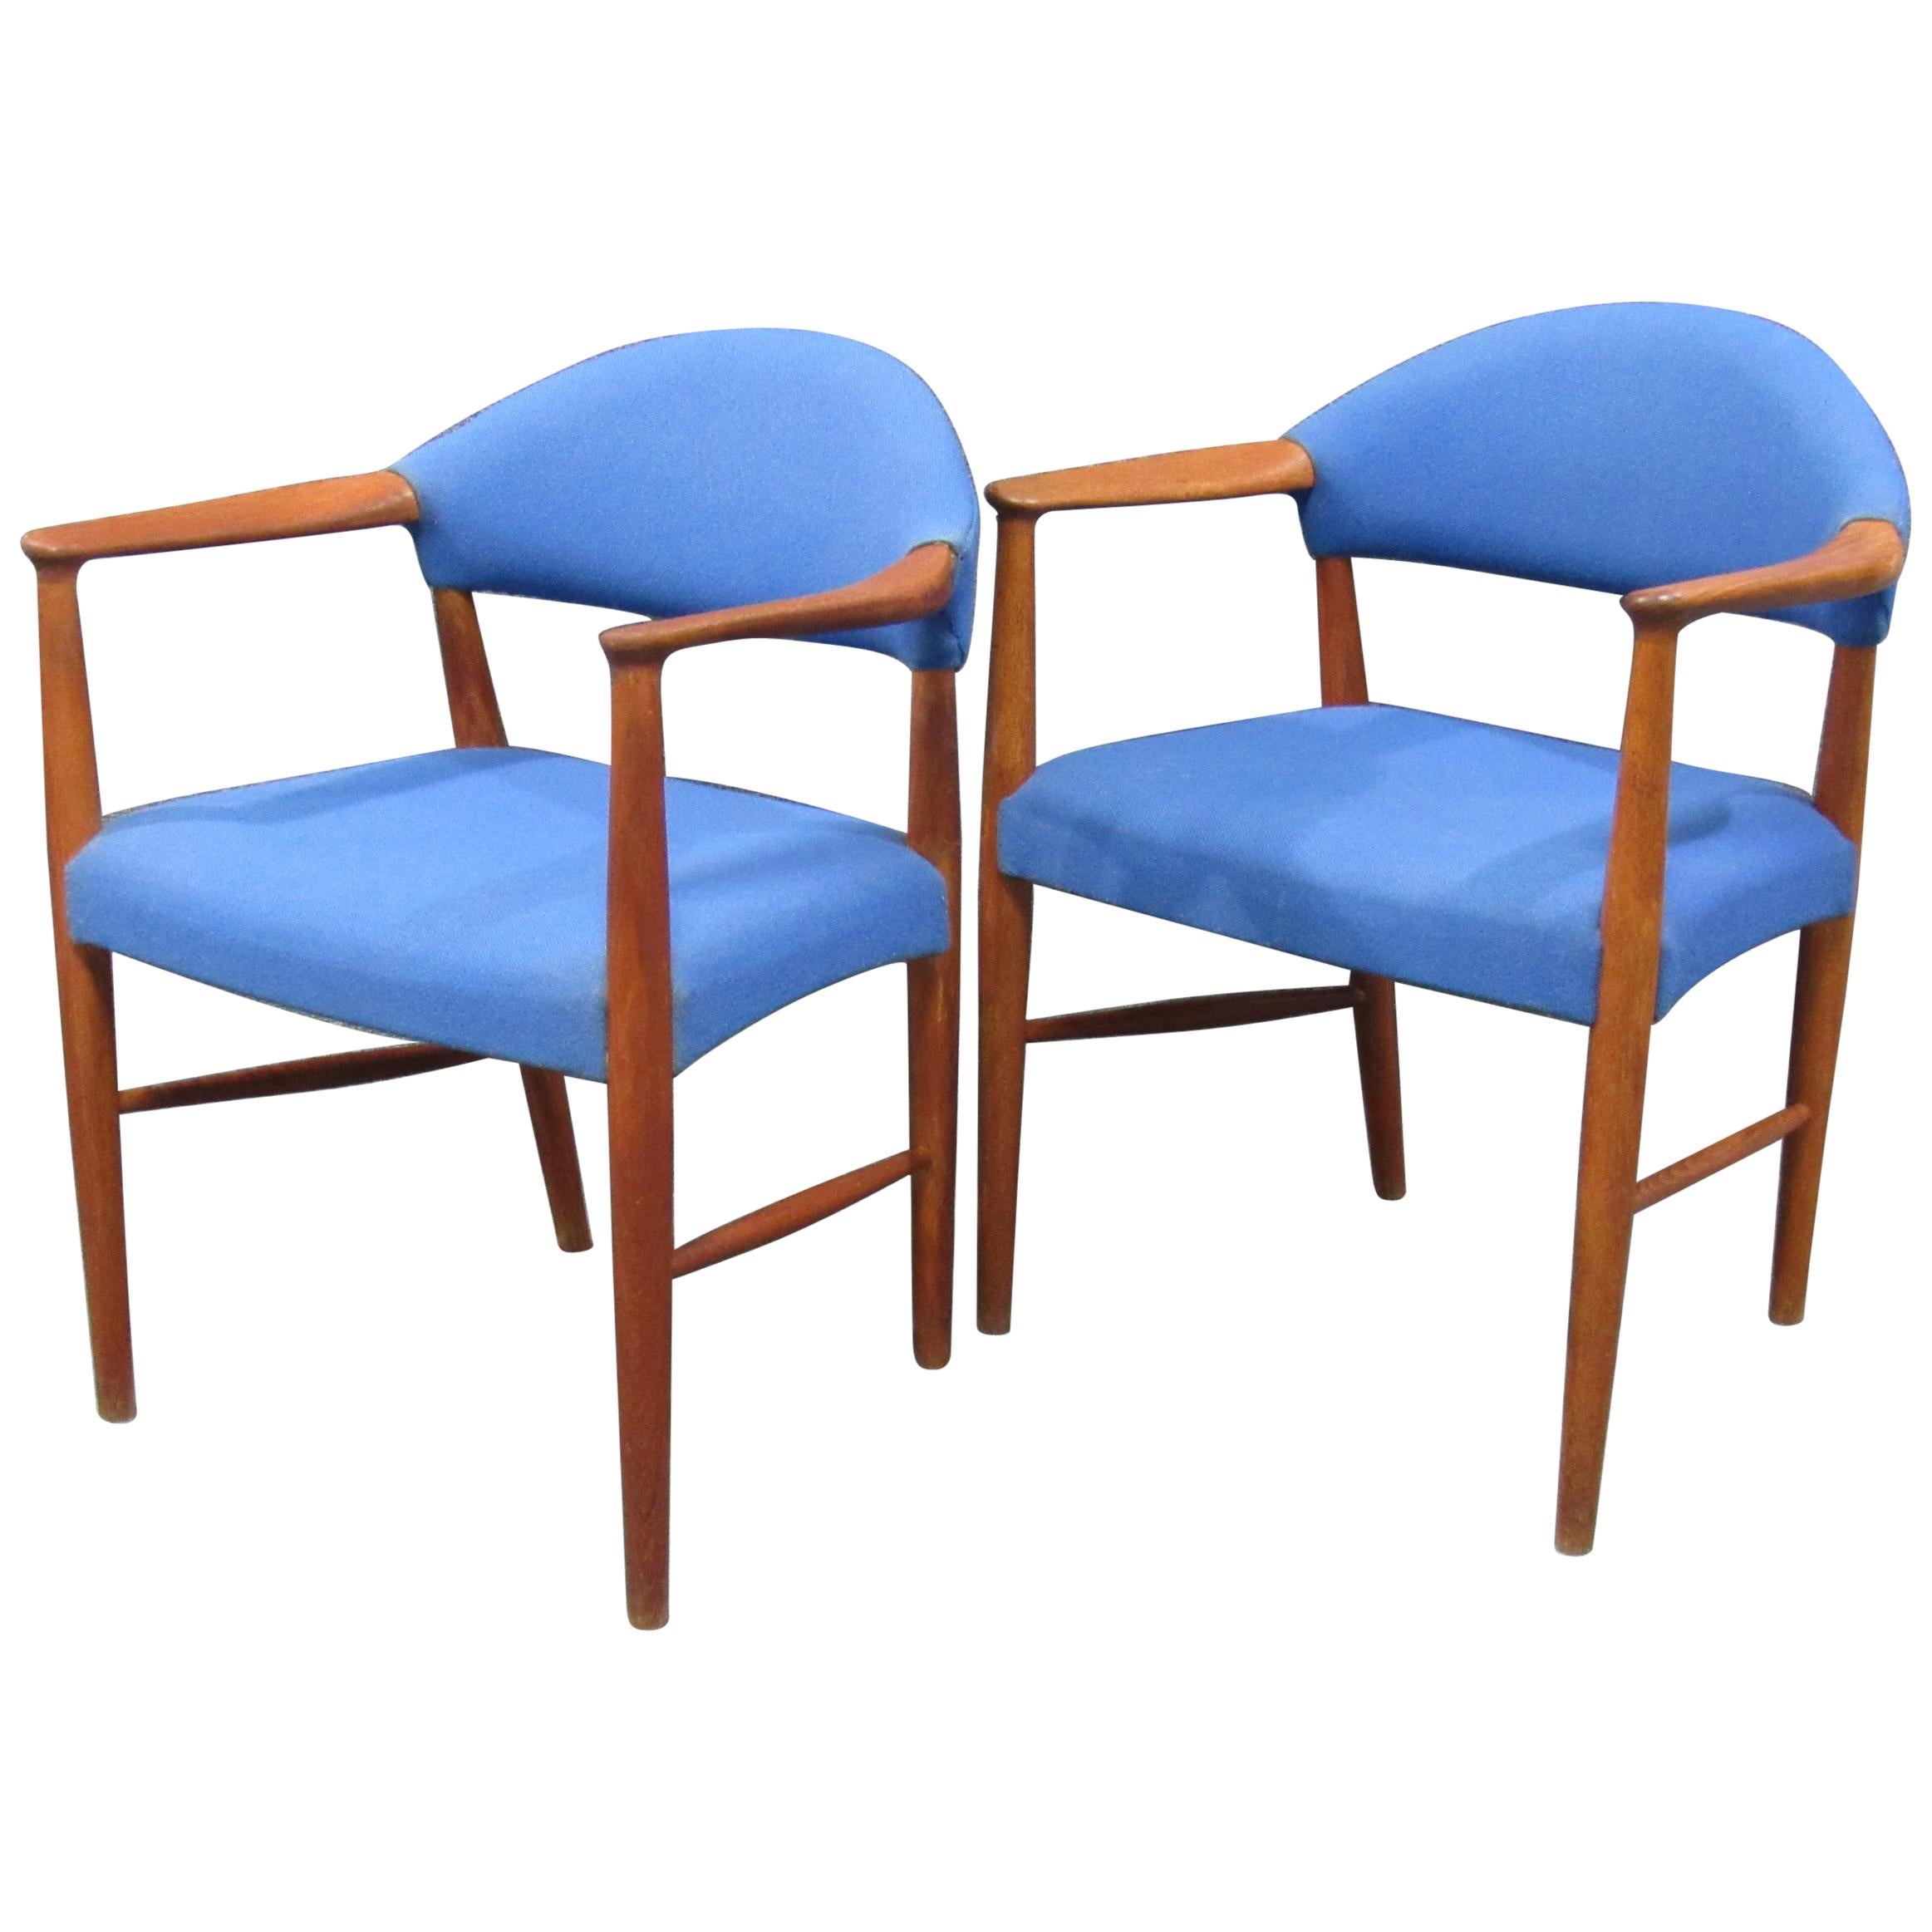 Danish Mid-Century Modern Teak and Blue Wool Armchairs Attributed to Hans Wegner For Sale